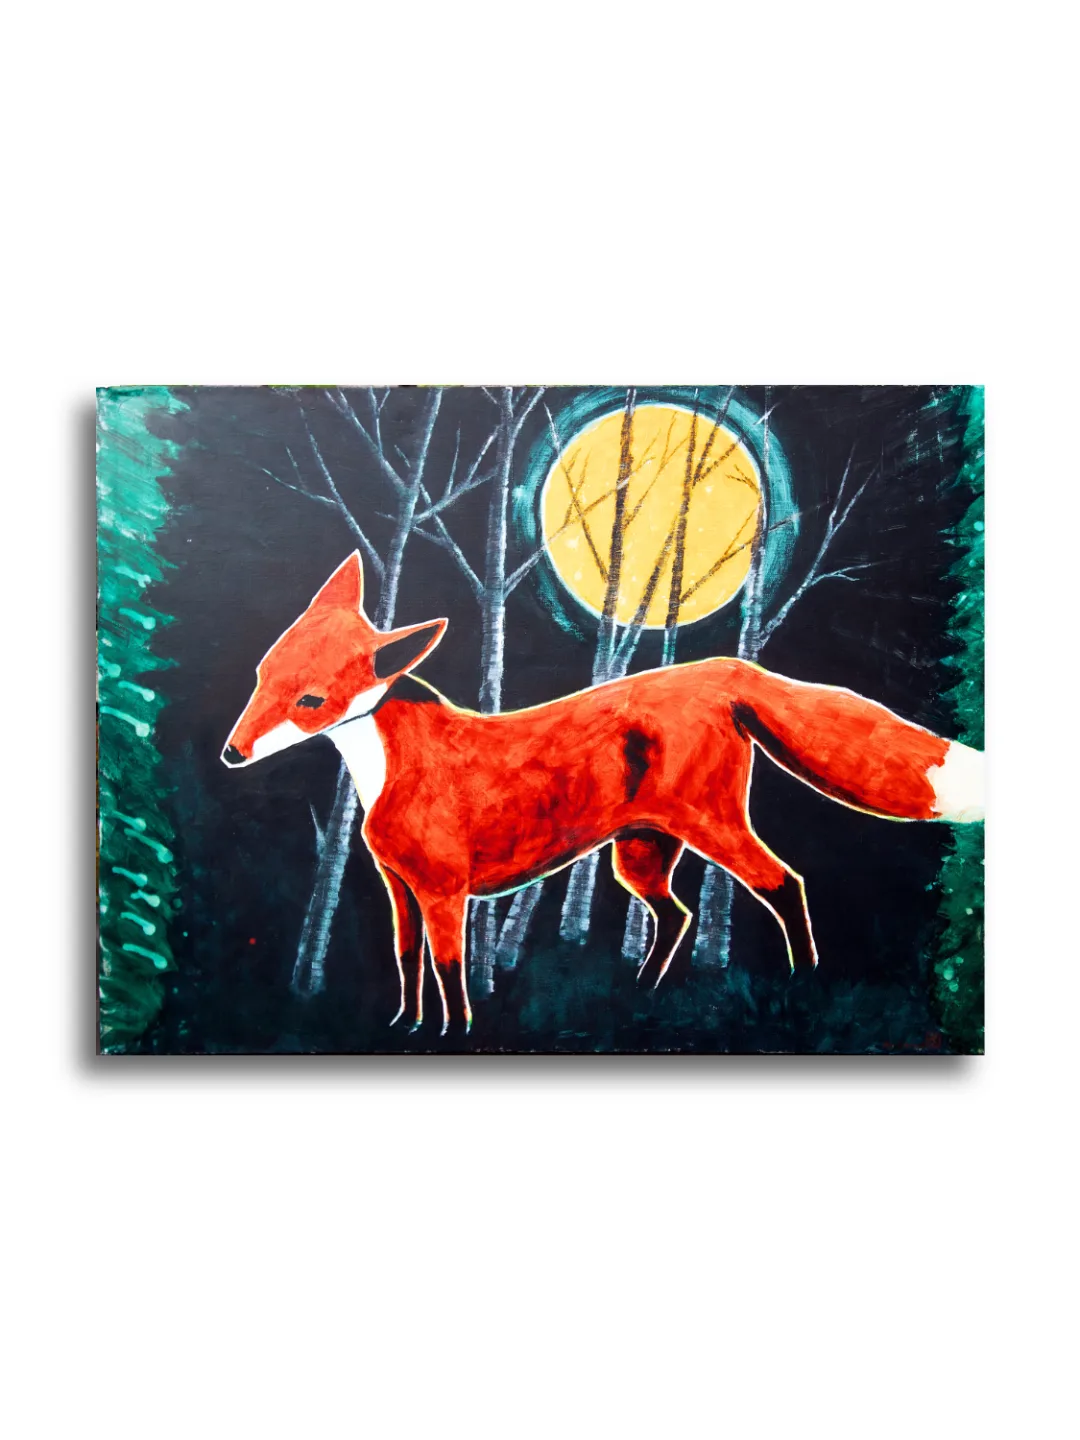 Rote Fuchs (Red Fox) by Ann Richmond - A stunning, Original artwork featuring a stylised Red Fox in an expressive style... Framing available.